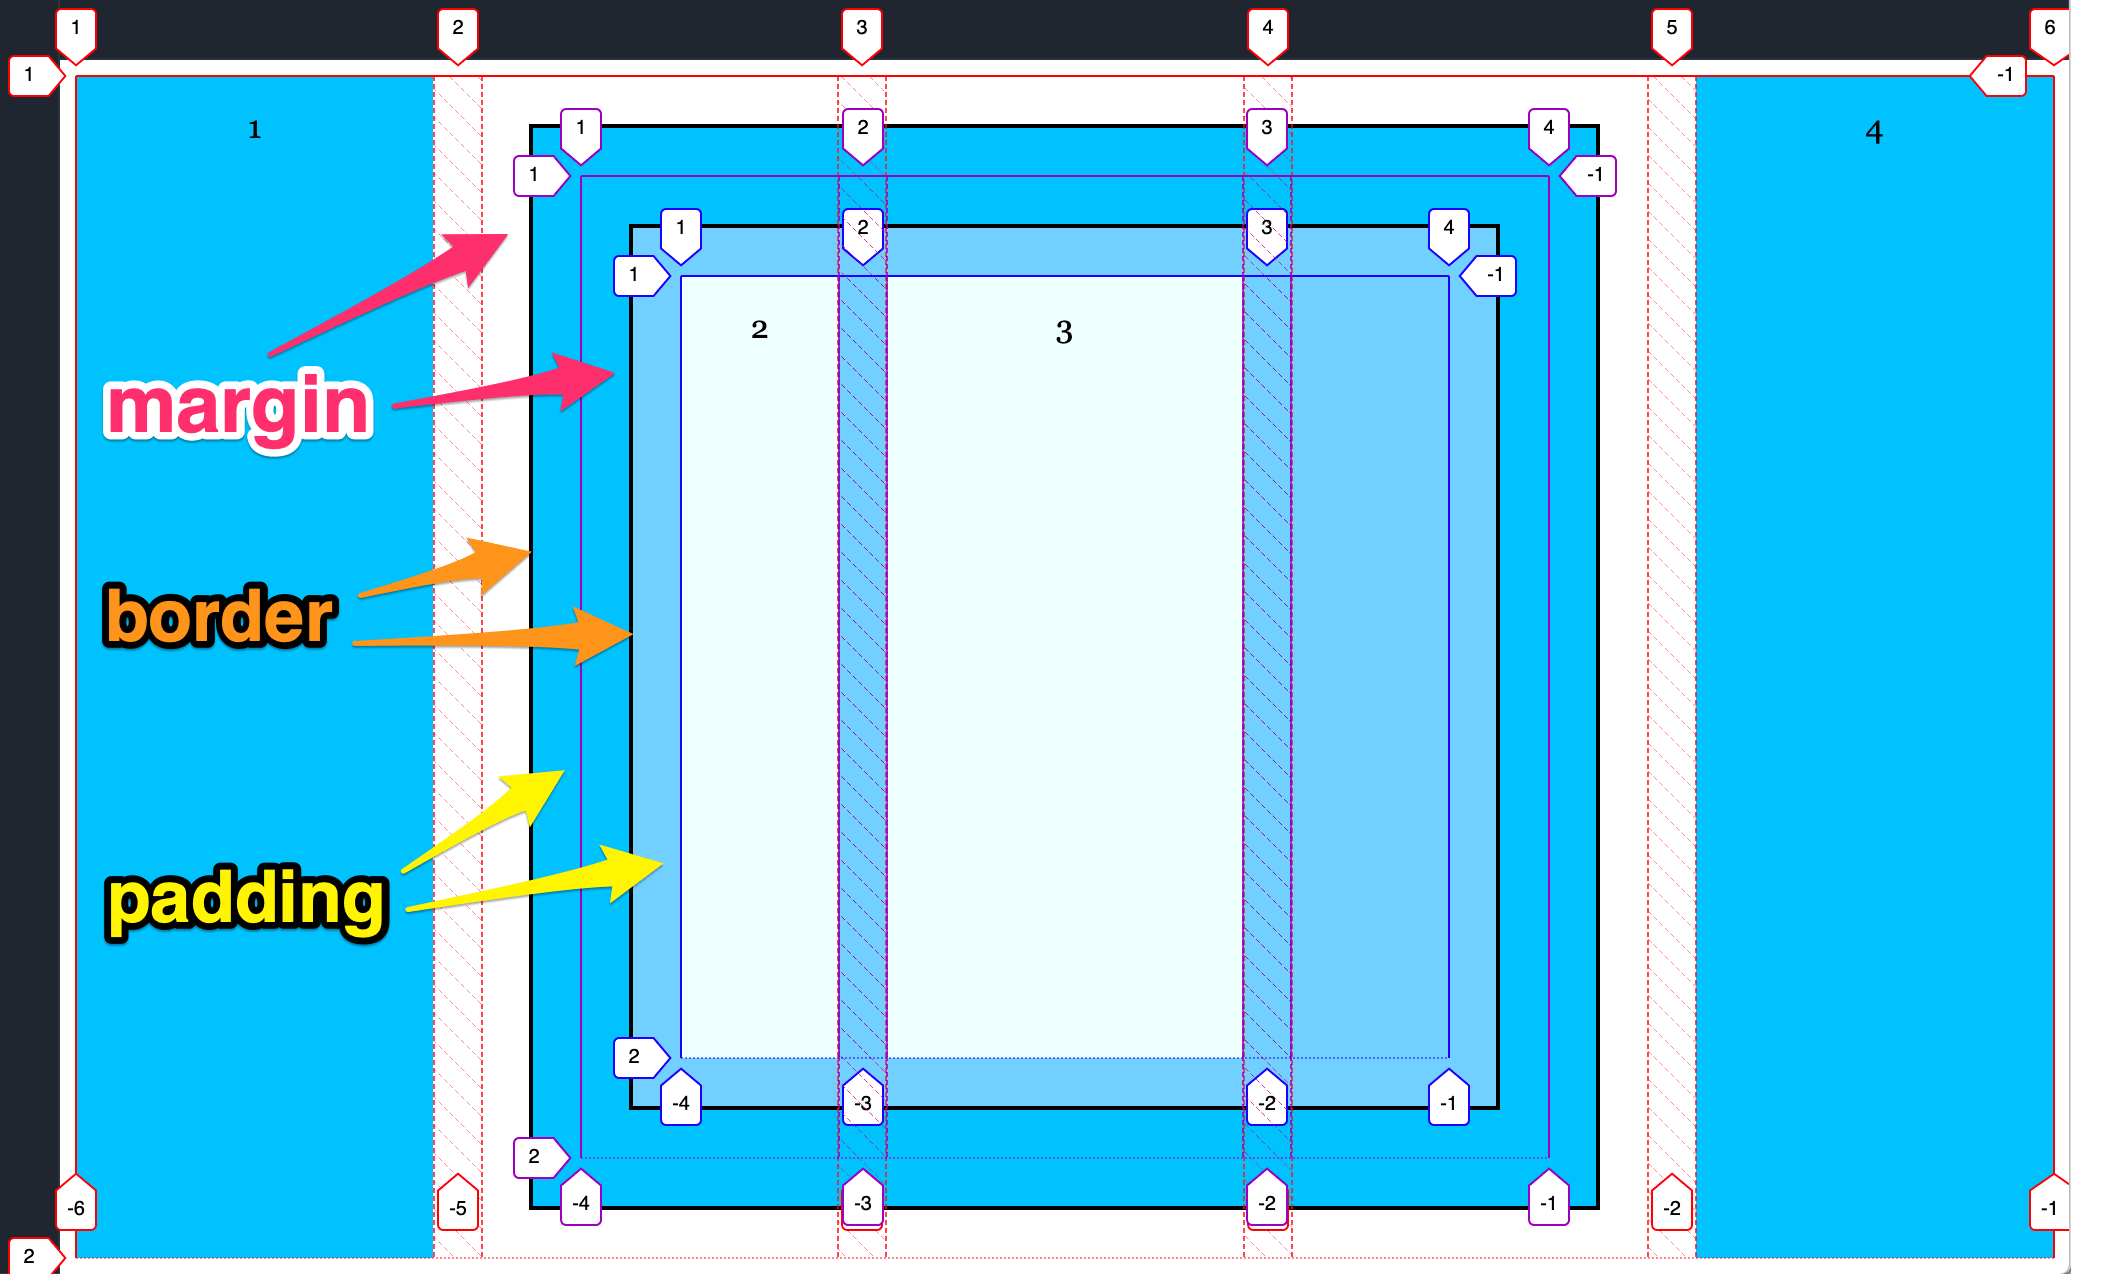 Diagram showing nested subgrid with margin, padding and borders